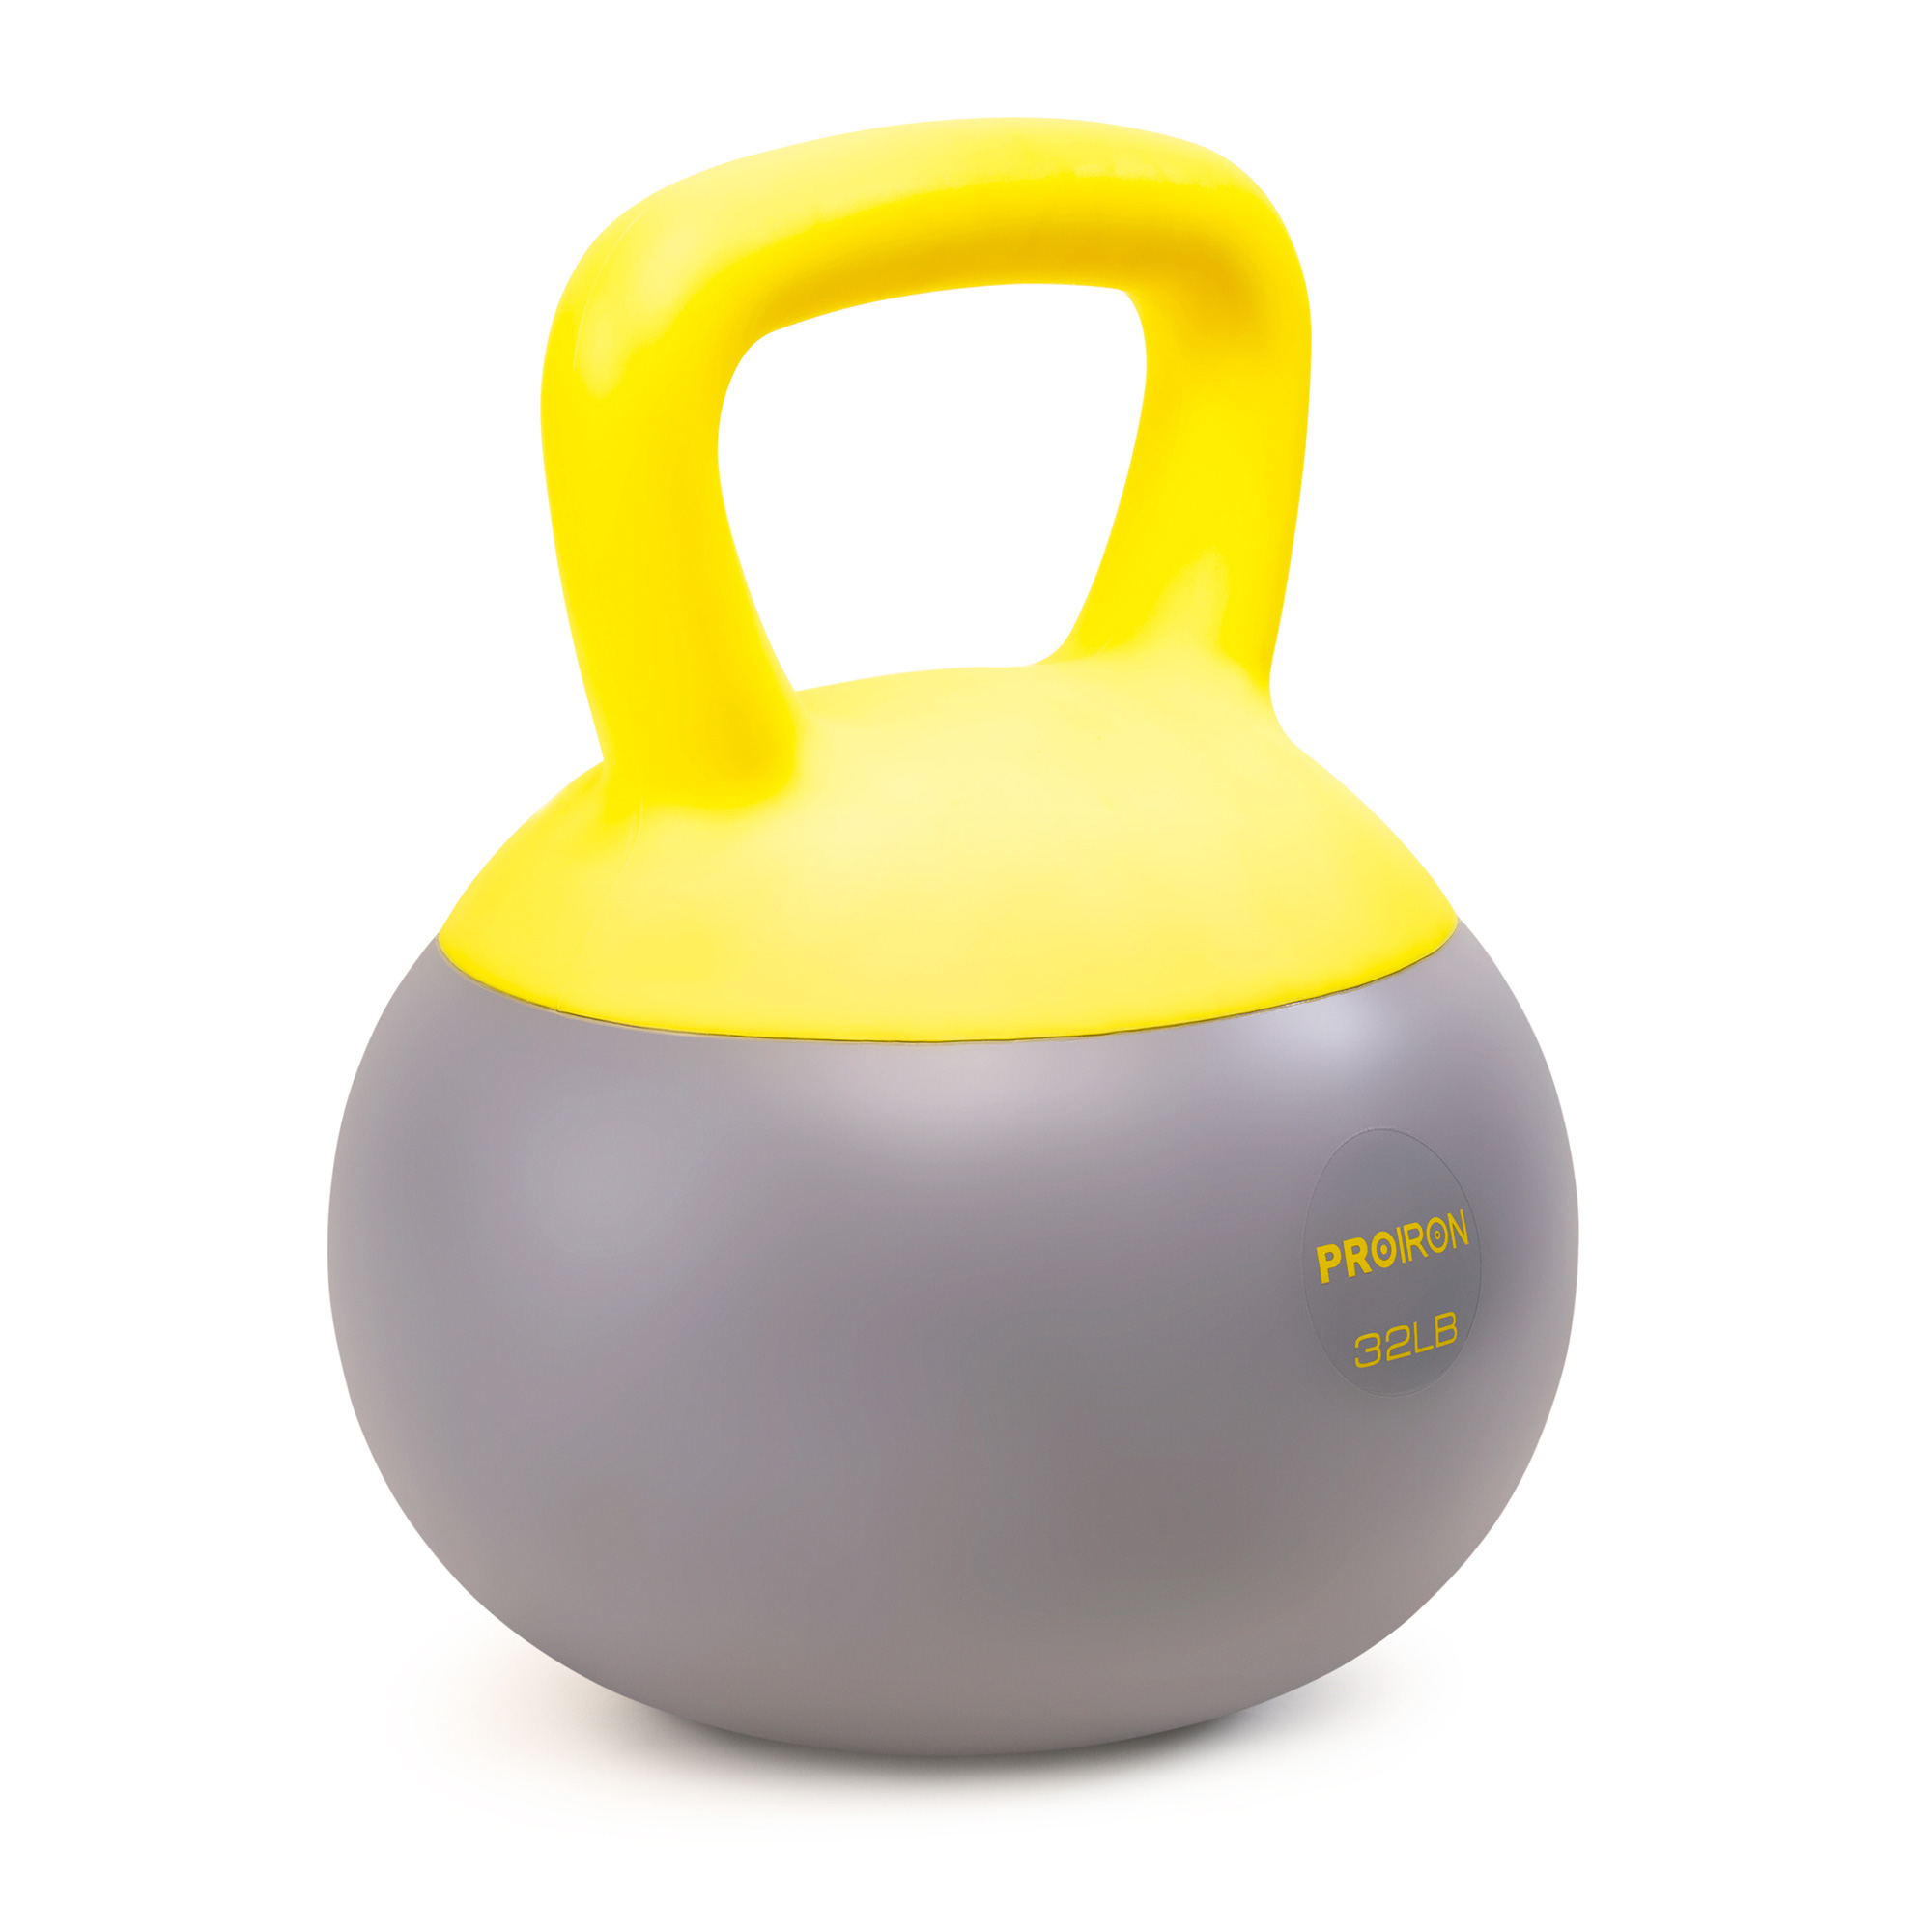 Fury Kettlebell 10kg  Solly M Sports Online Store